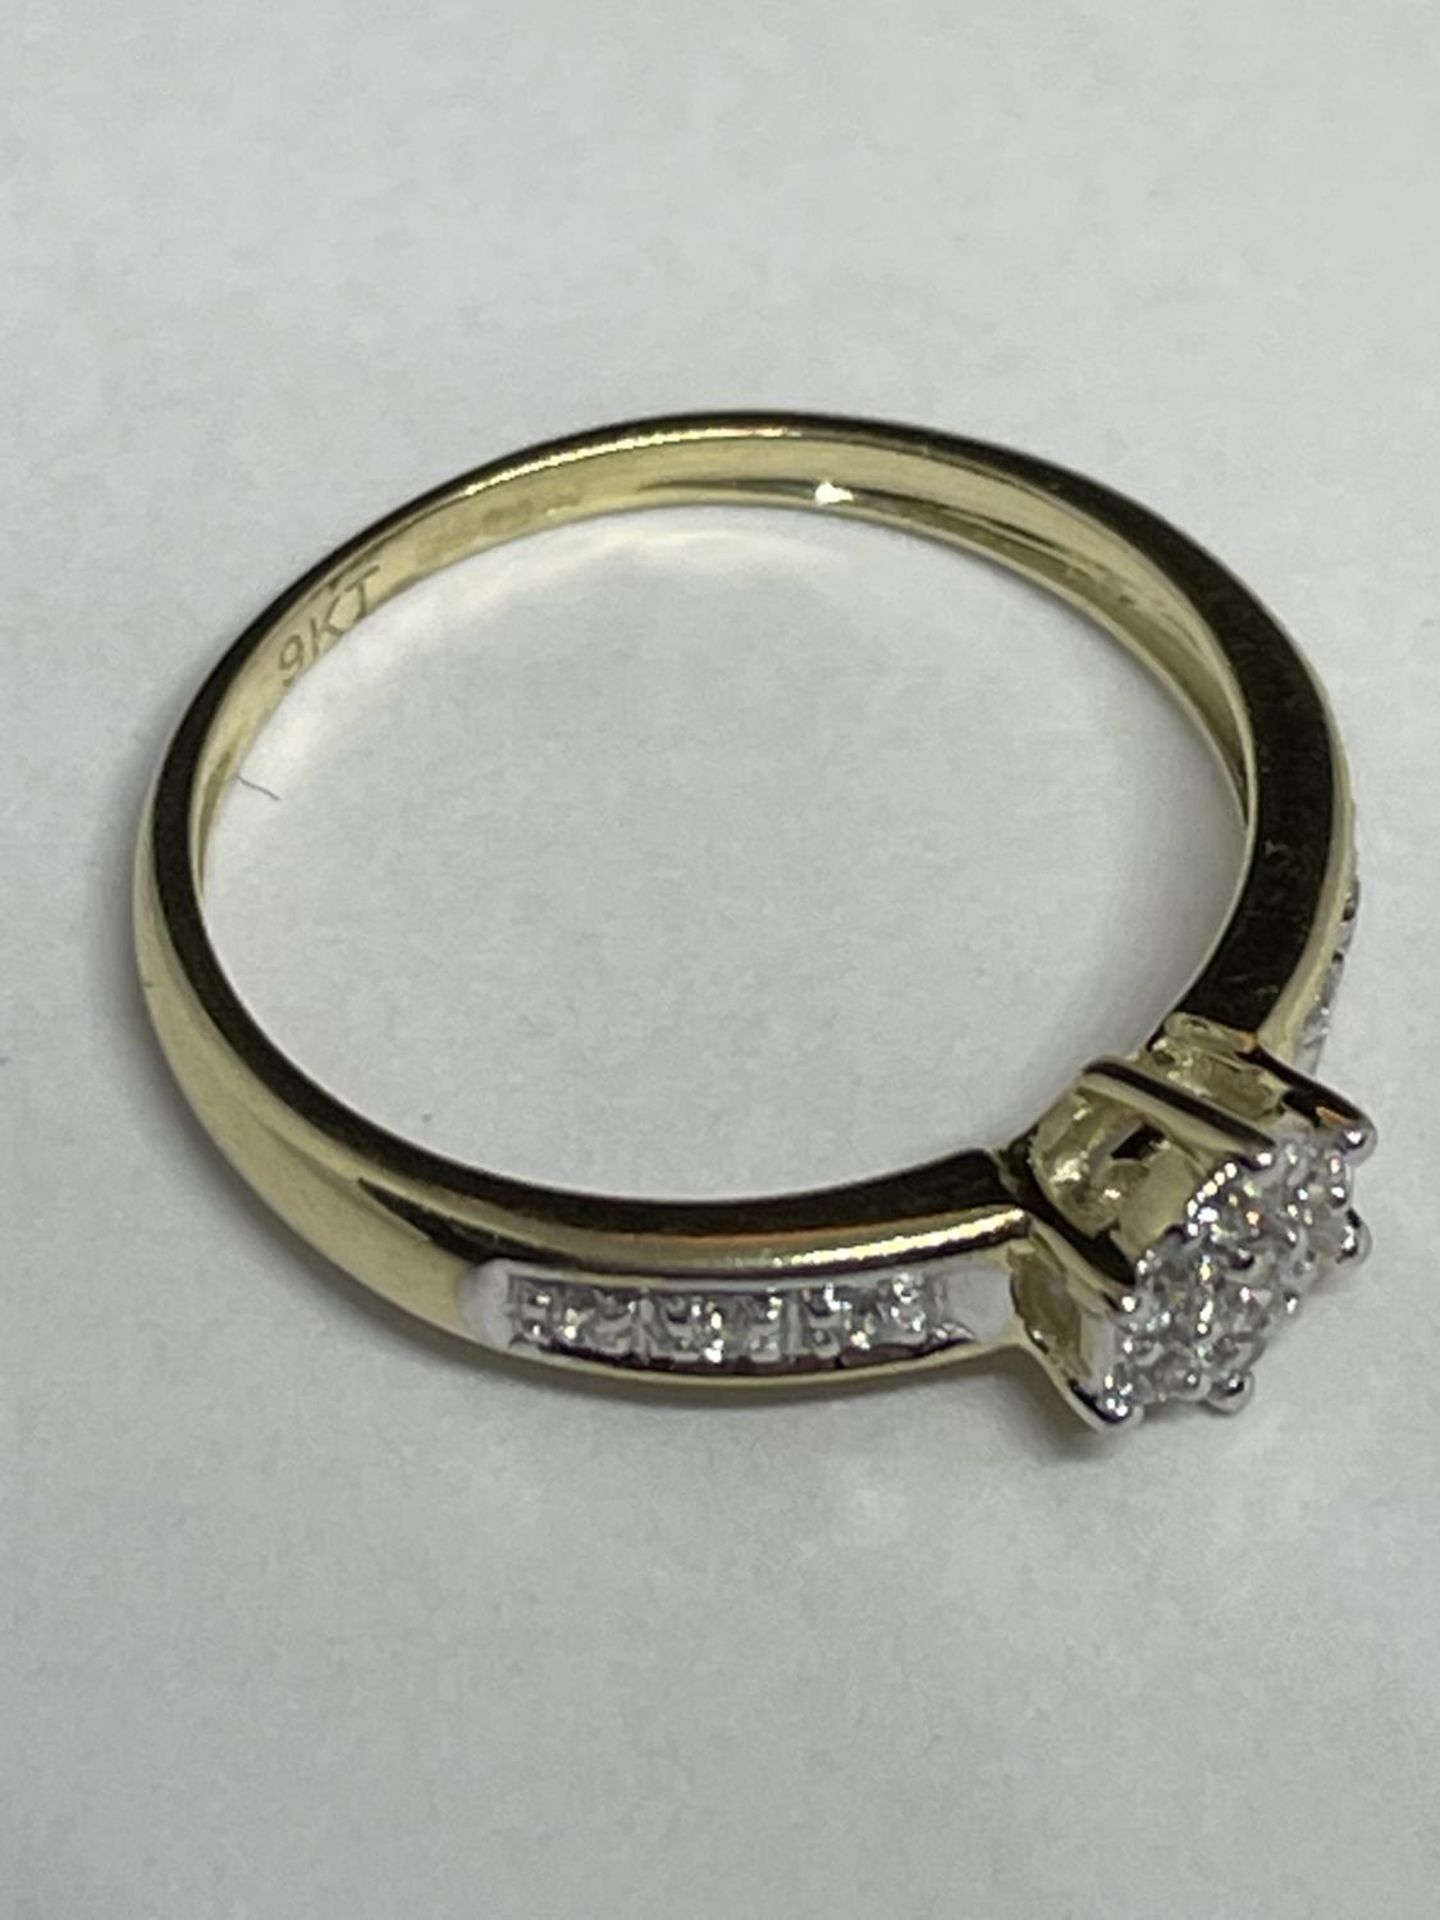 A 9 CARAT GOLD RING WITH CLEAR STONES IN A STAR DESIGN AND ON THE SHOULDERS SIZE J - Image 4 of 4